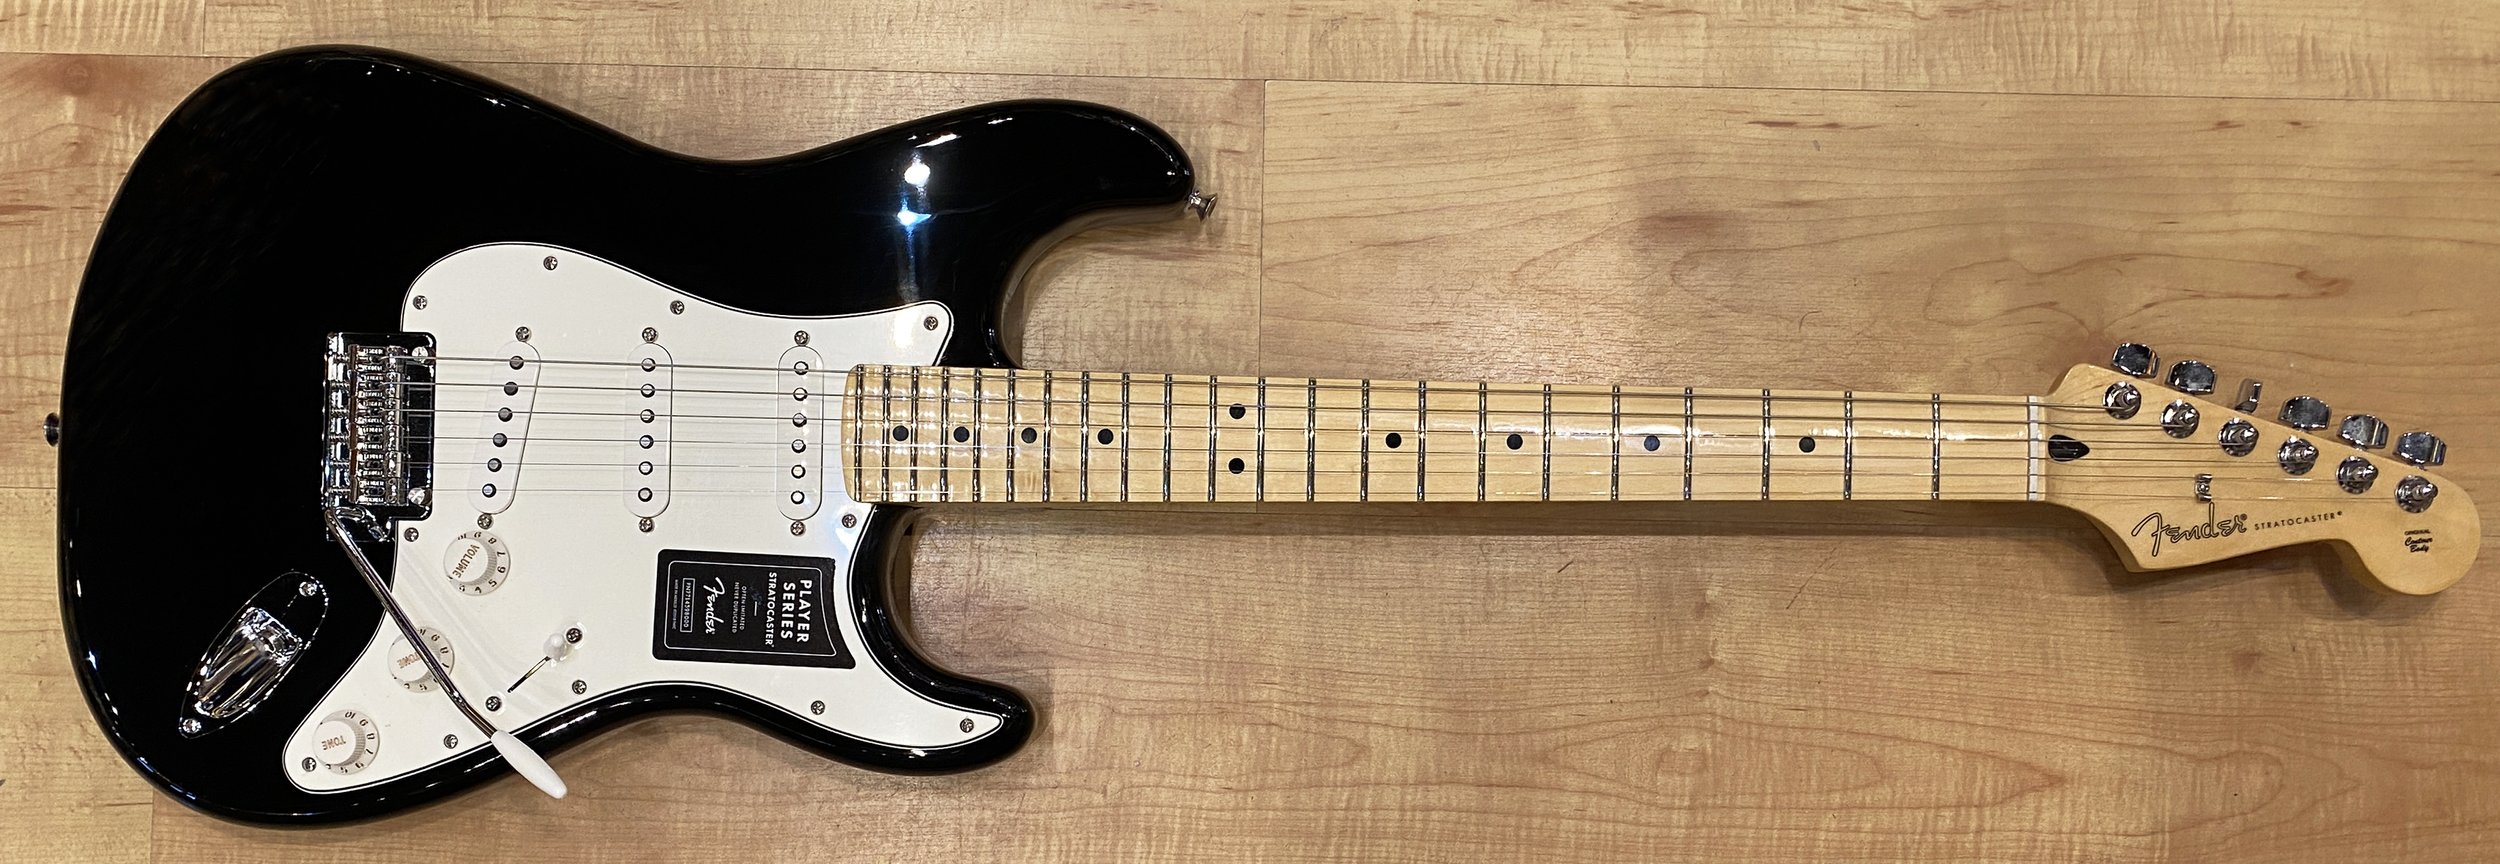 Fender Player Stratocaster Electric Guitar Black — Andy Babiuk's Fab Gear